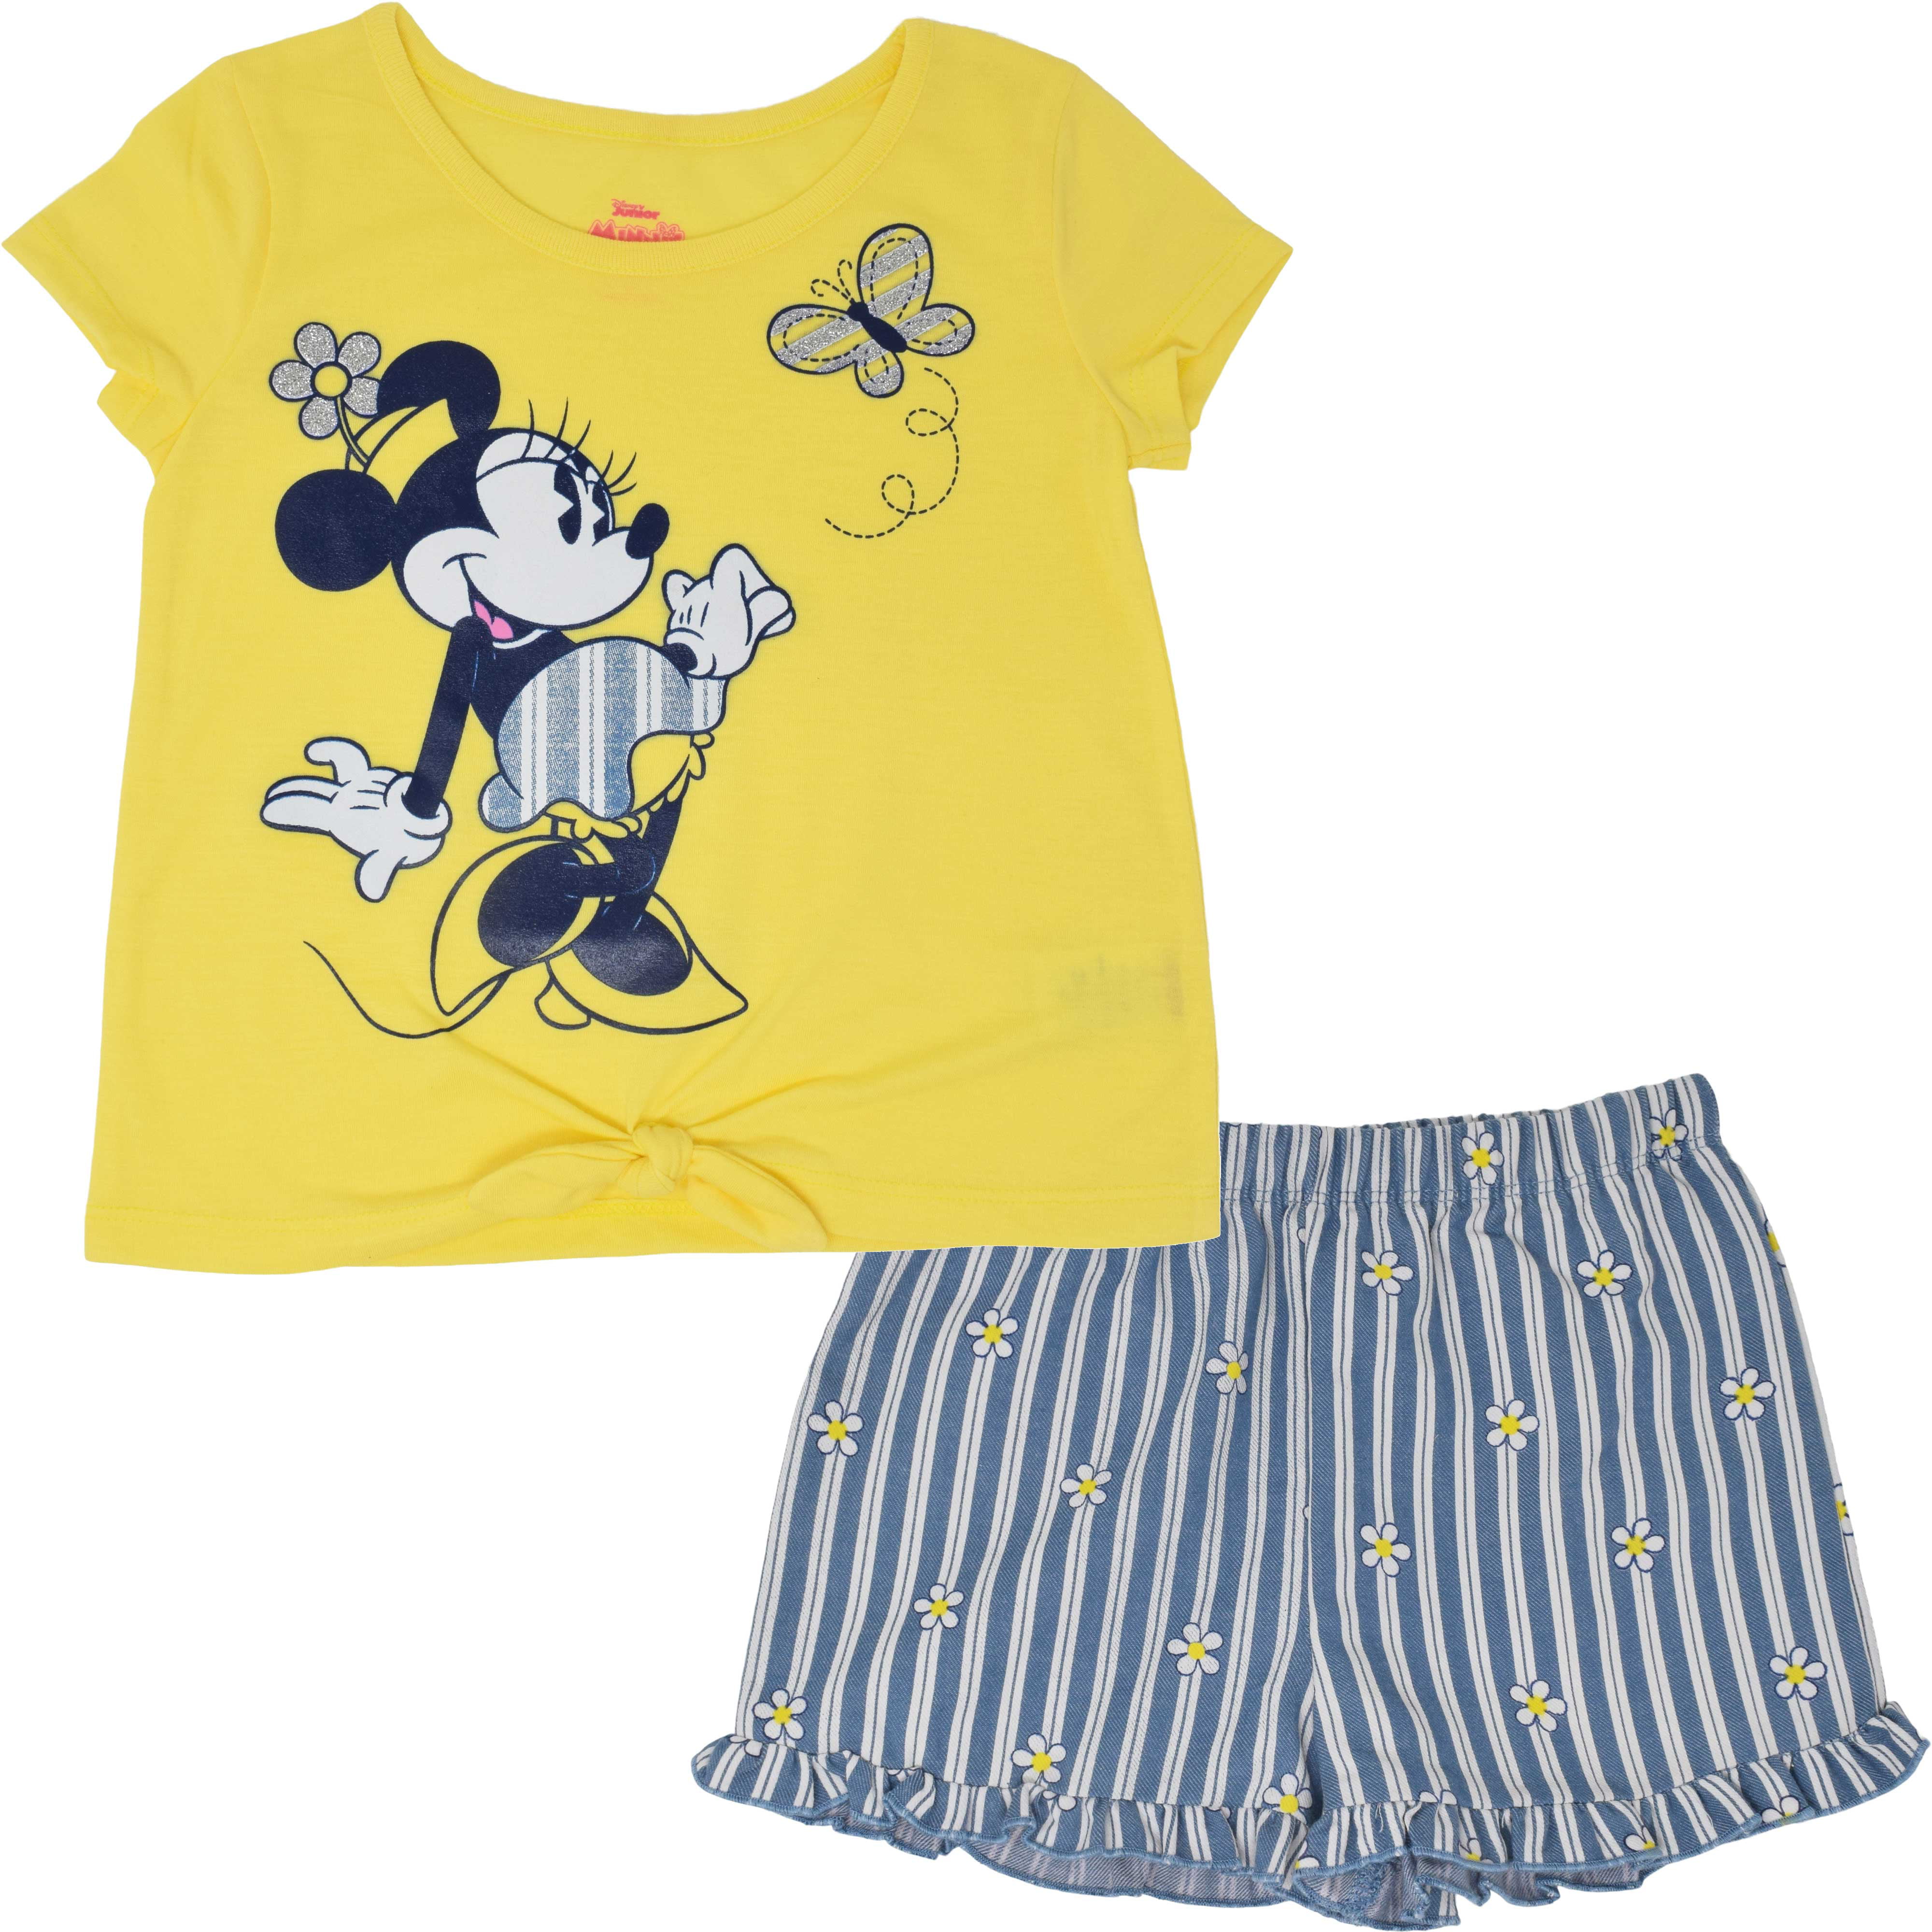 SIZES YELLOW Disney Girls Printed Shorty Sets NEW 2,3 & 4 YEARS 